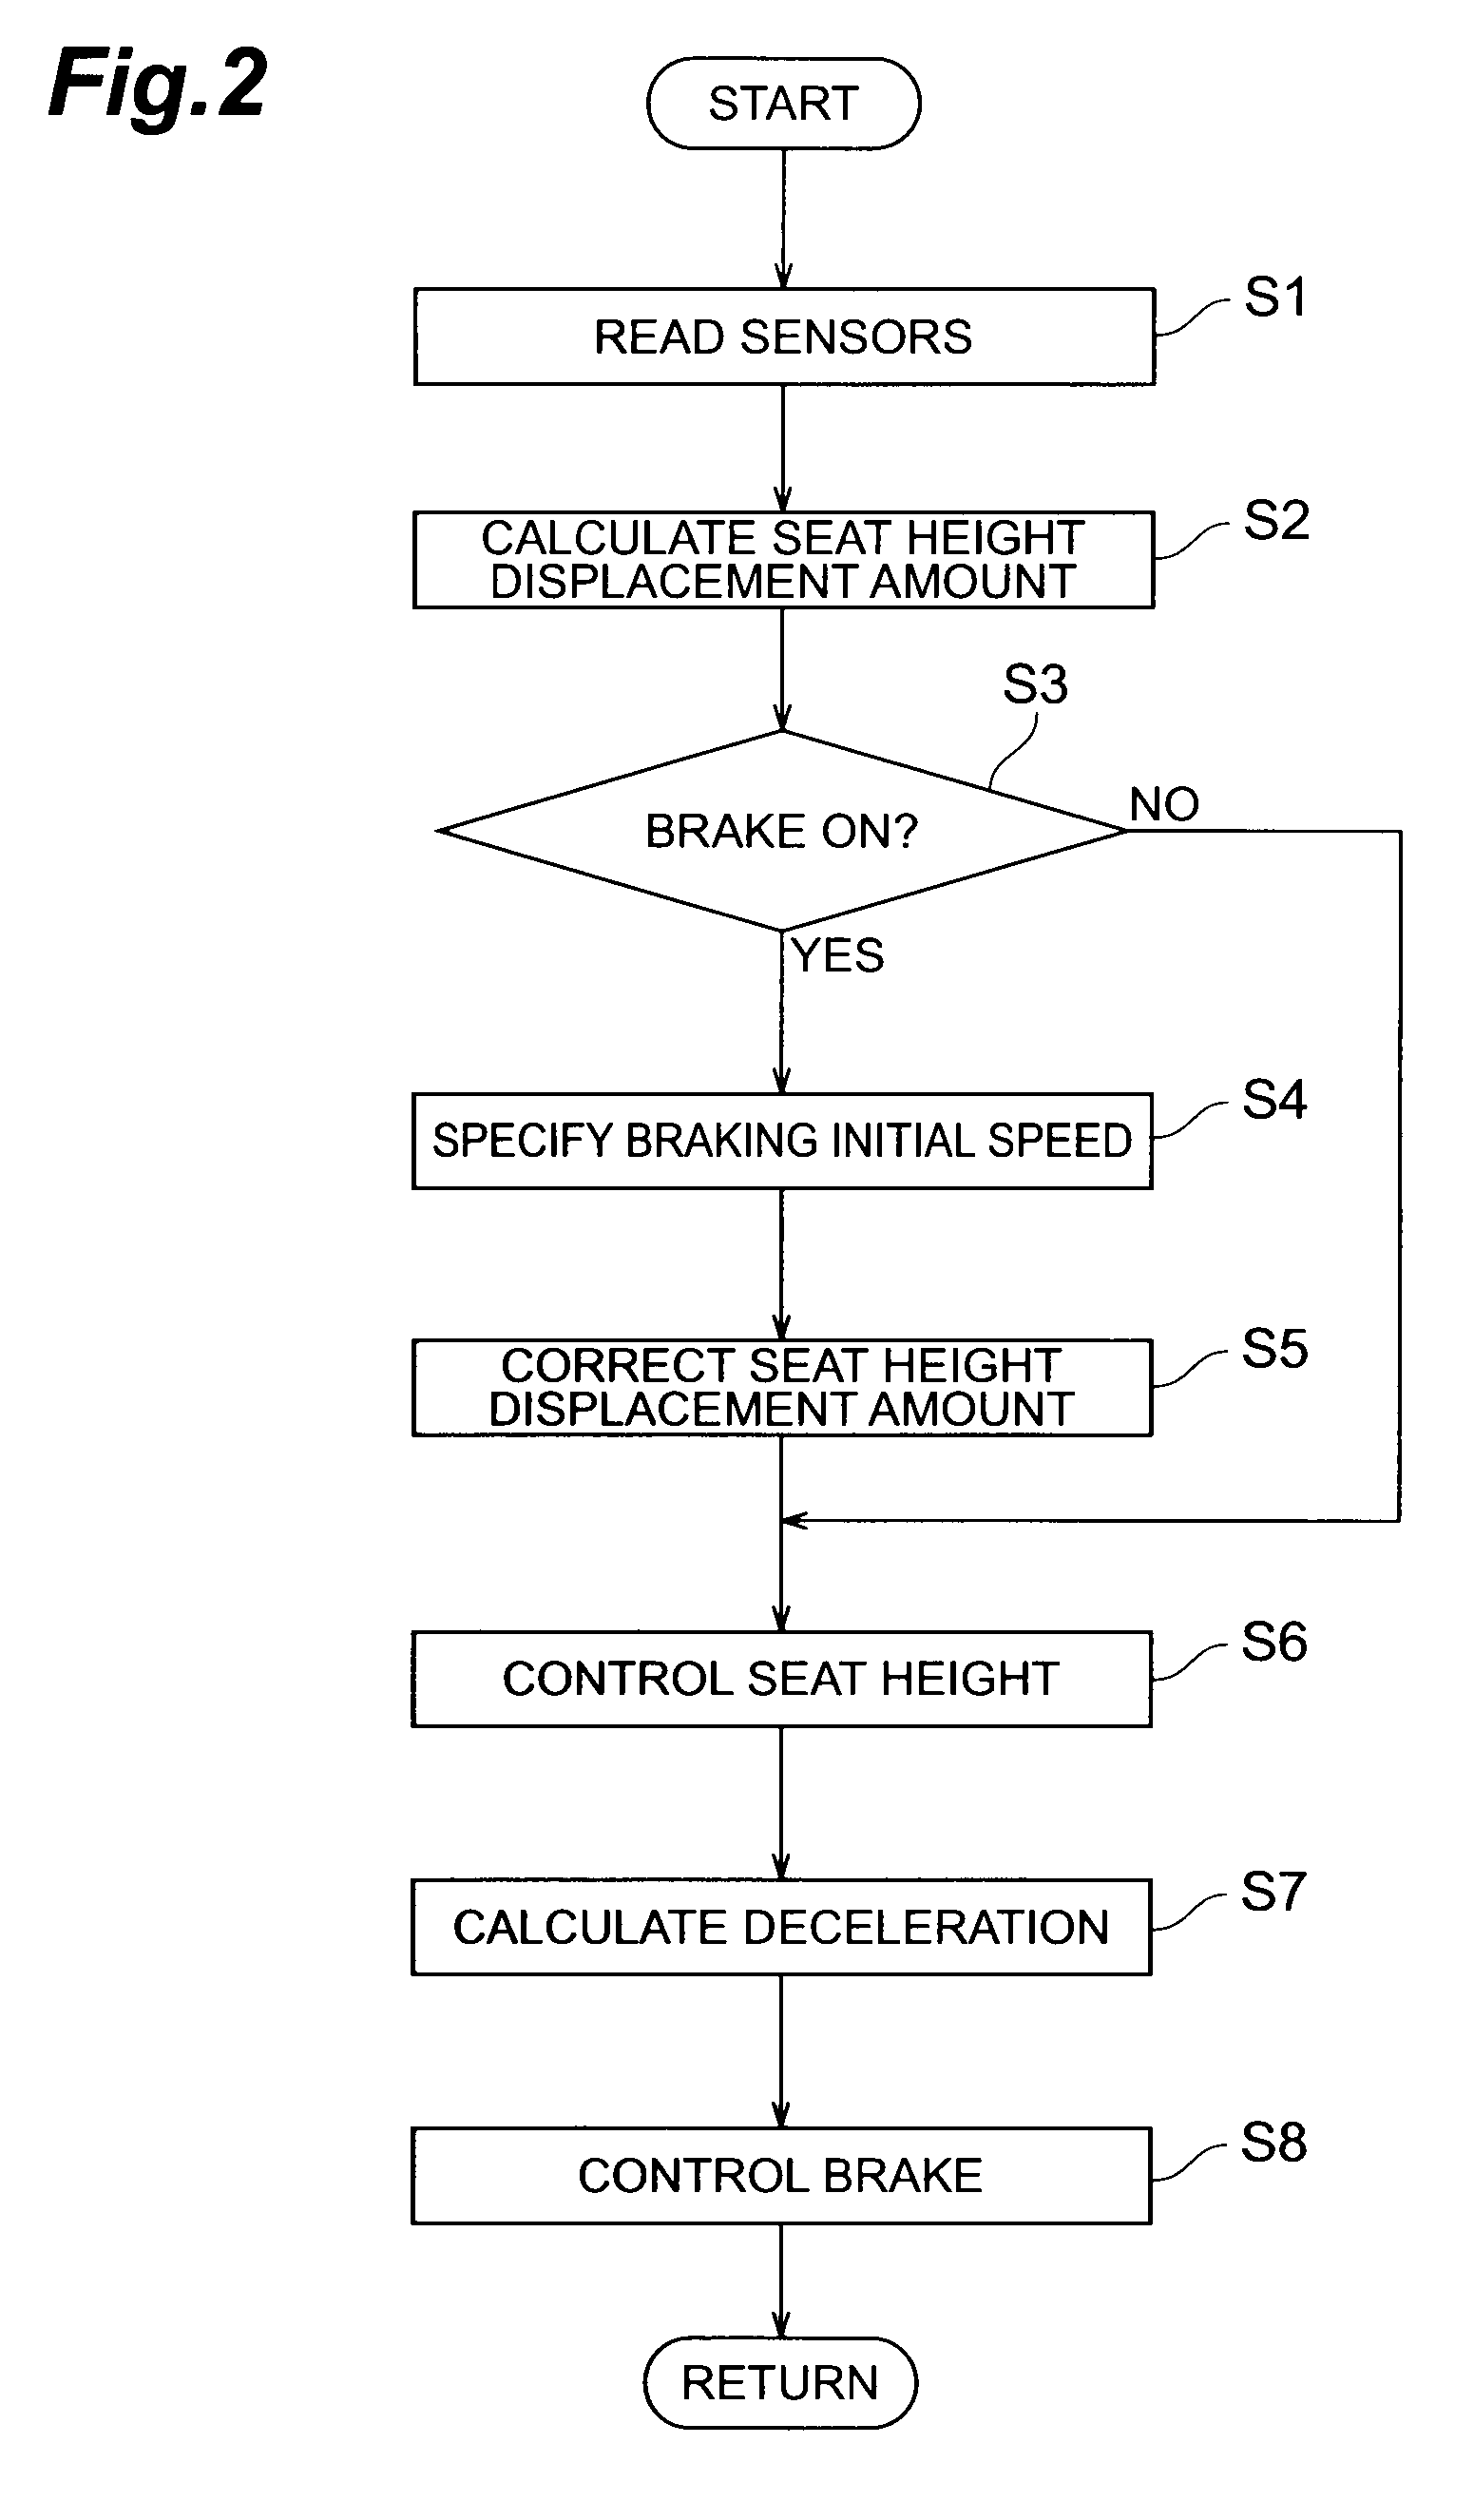 Height control device for vehicle